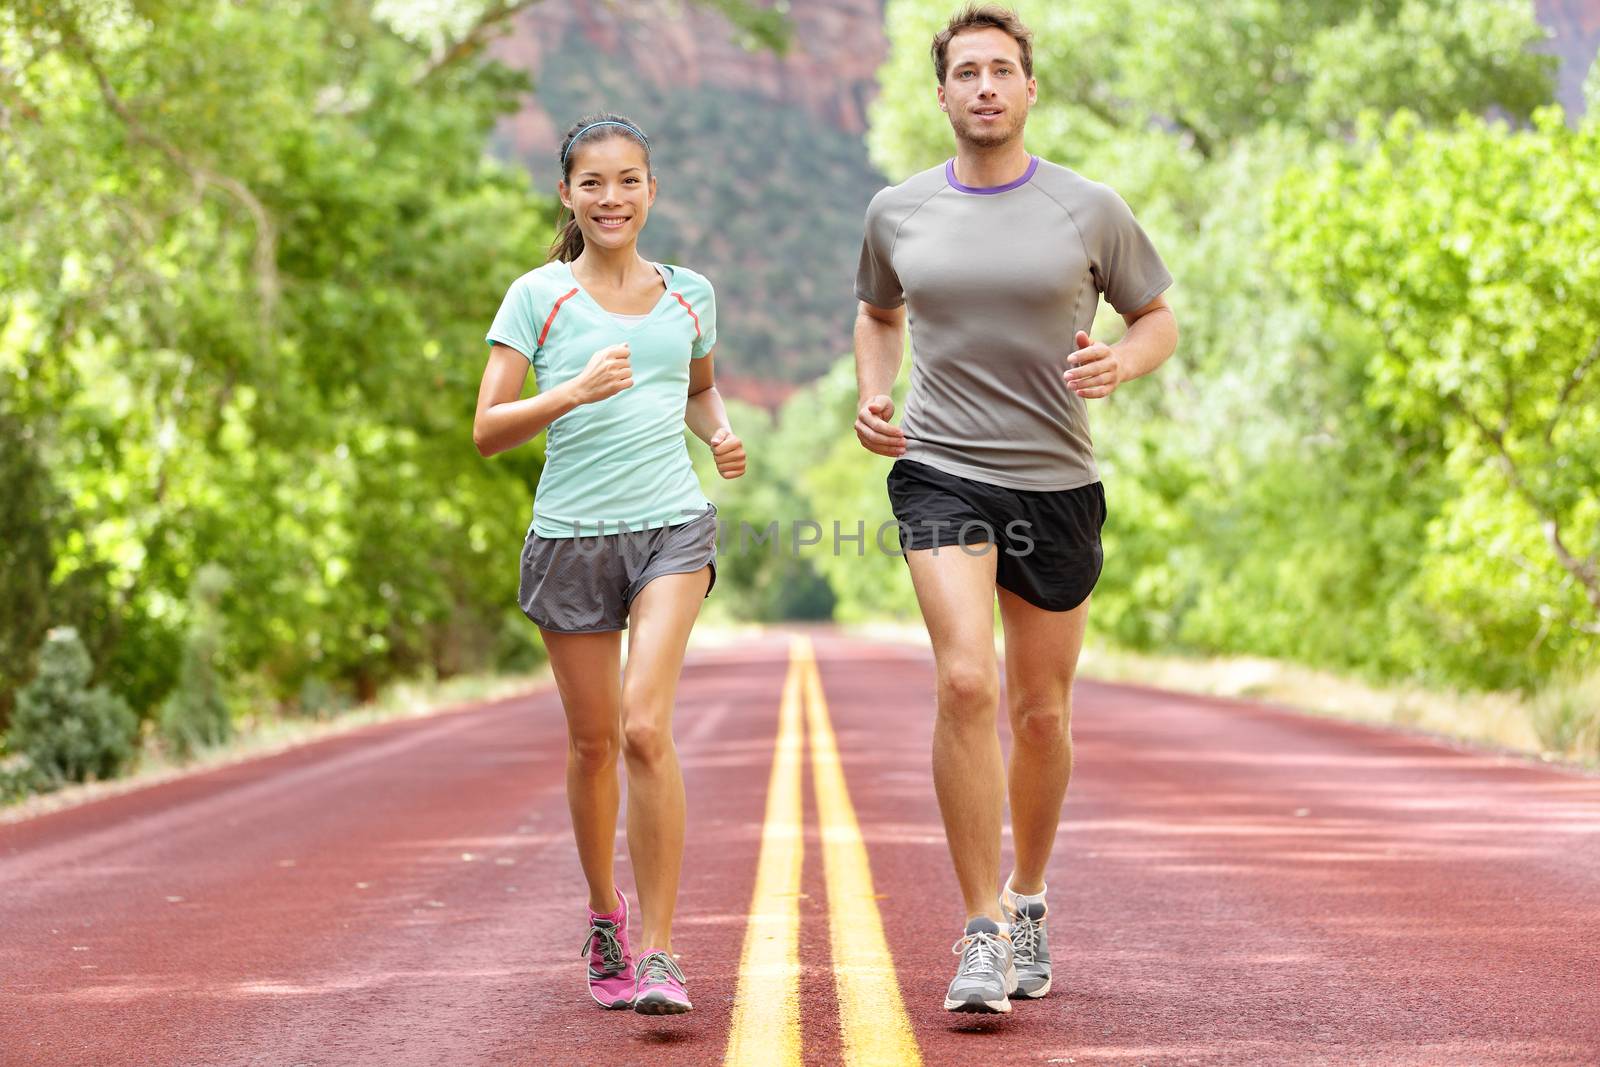 Running Health and fitness. Runners on run training during fitness workout outside on road. People jogging together living healthy active lifestyle outside in summer. Full body length of woman and man